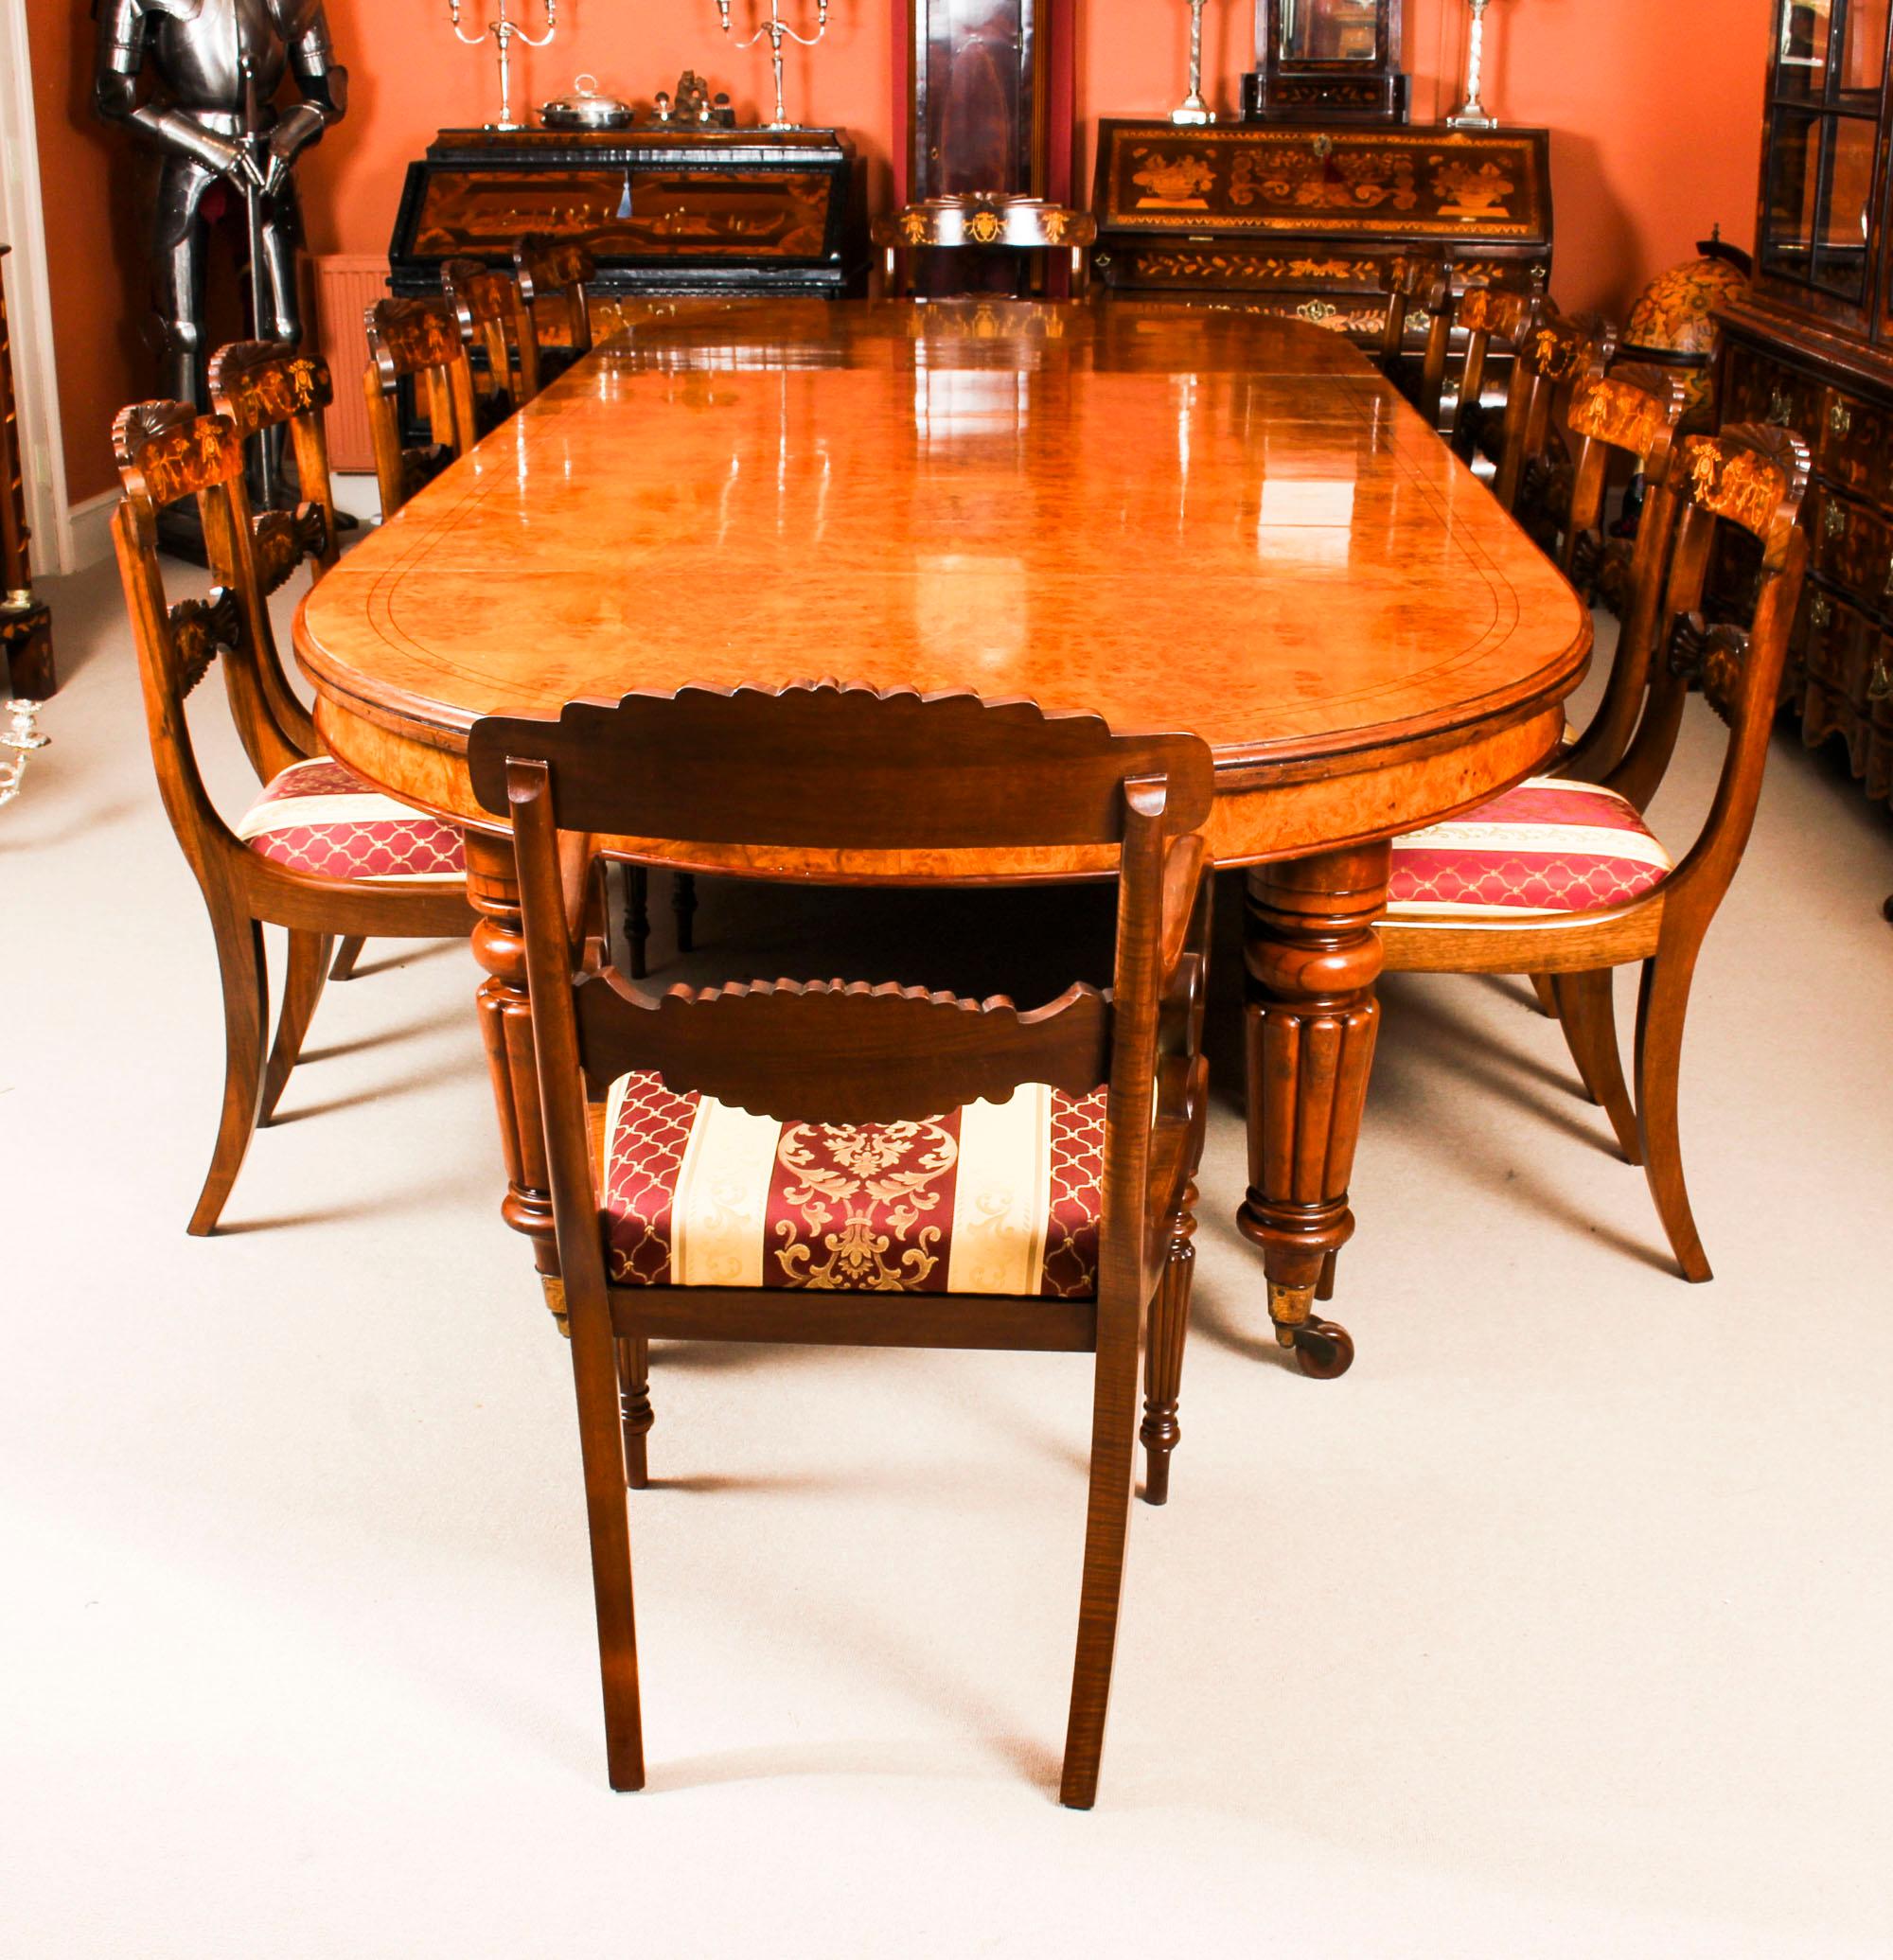 There is no mistaking the style and design of this exquisite dining set comprising an antique Victorian pollard oak and black line inlaid extending dining table, circa 1840 in date with a bespoke set of twelve dining chairs.

This amazing table